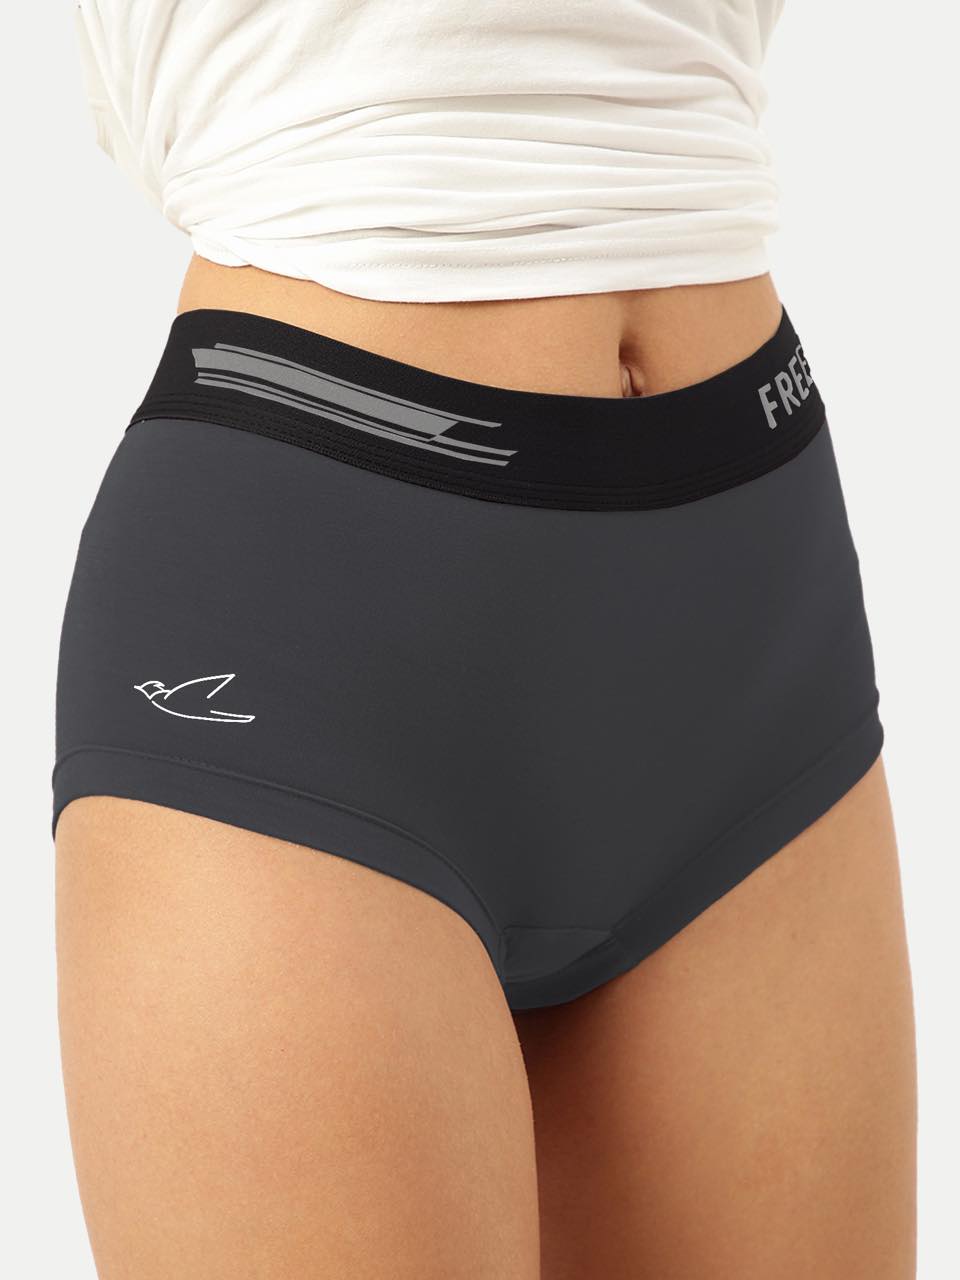 Women's Micro Modal Boxer Briefs (Pack of 6)